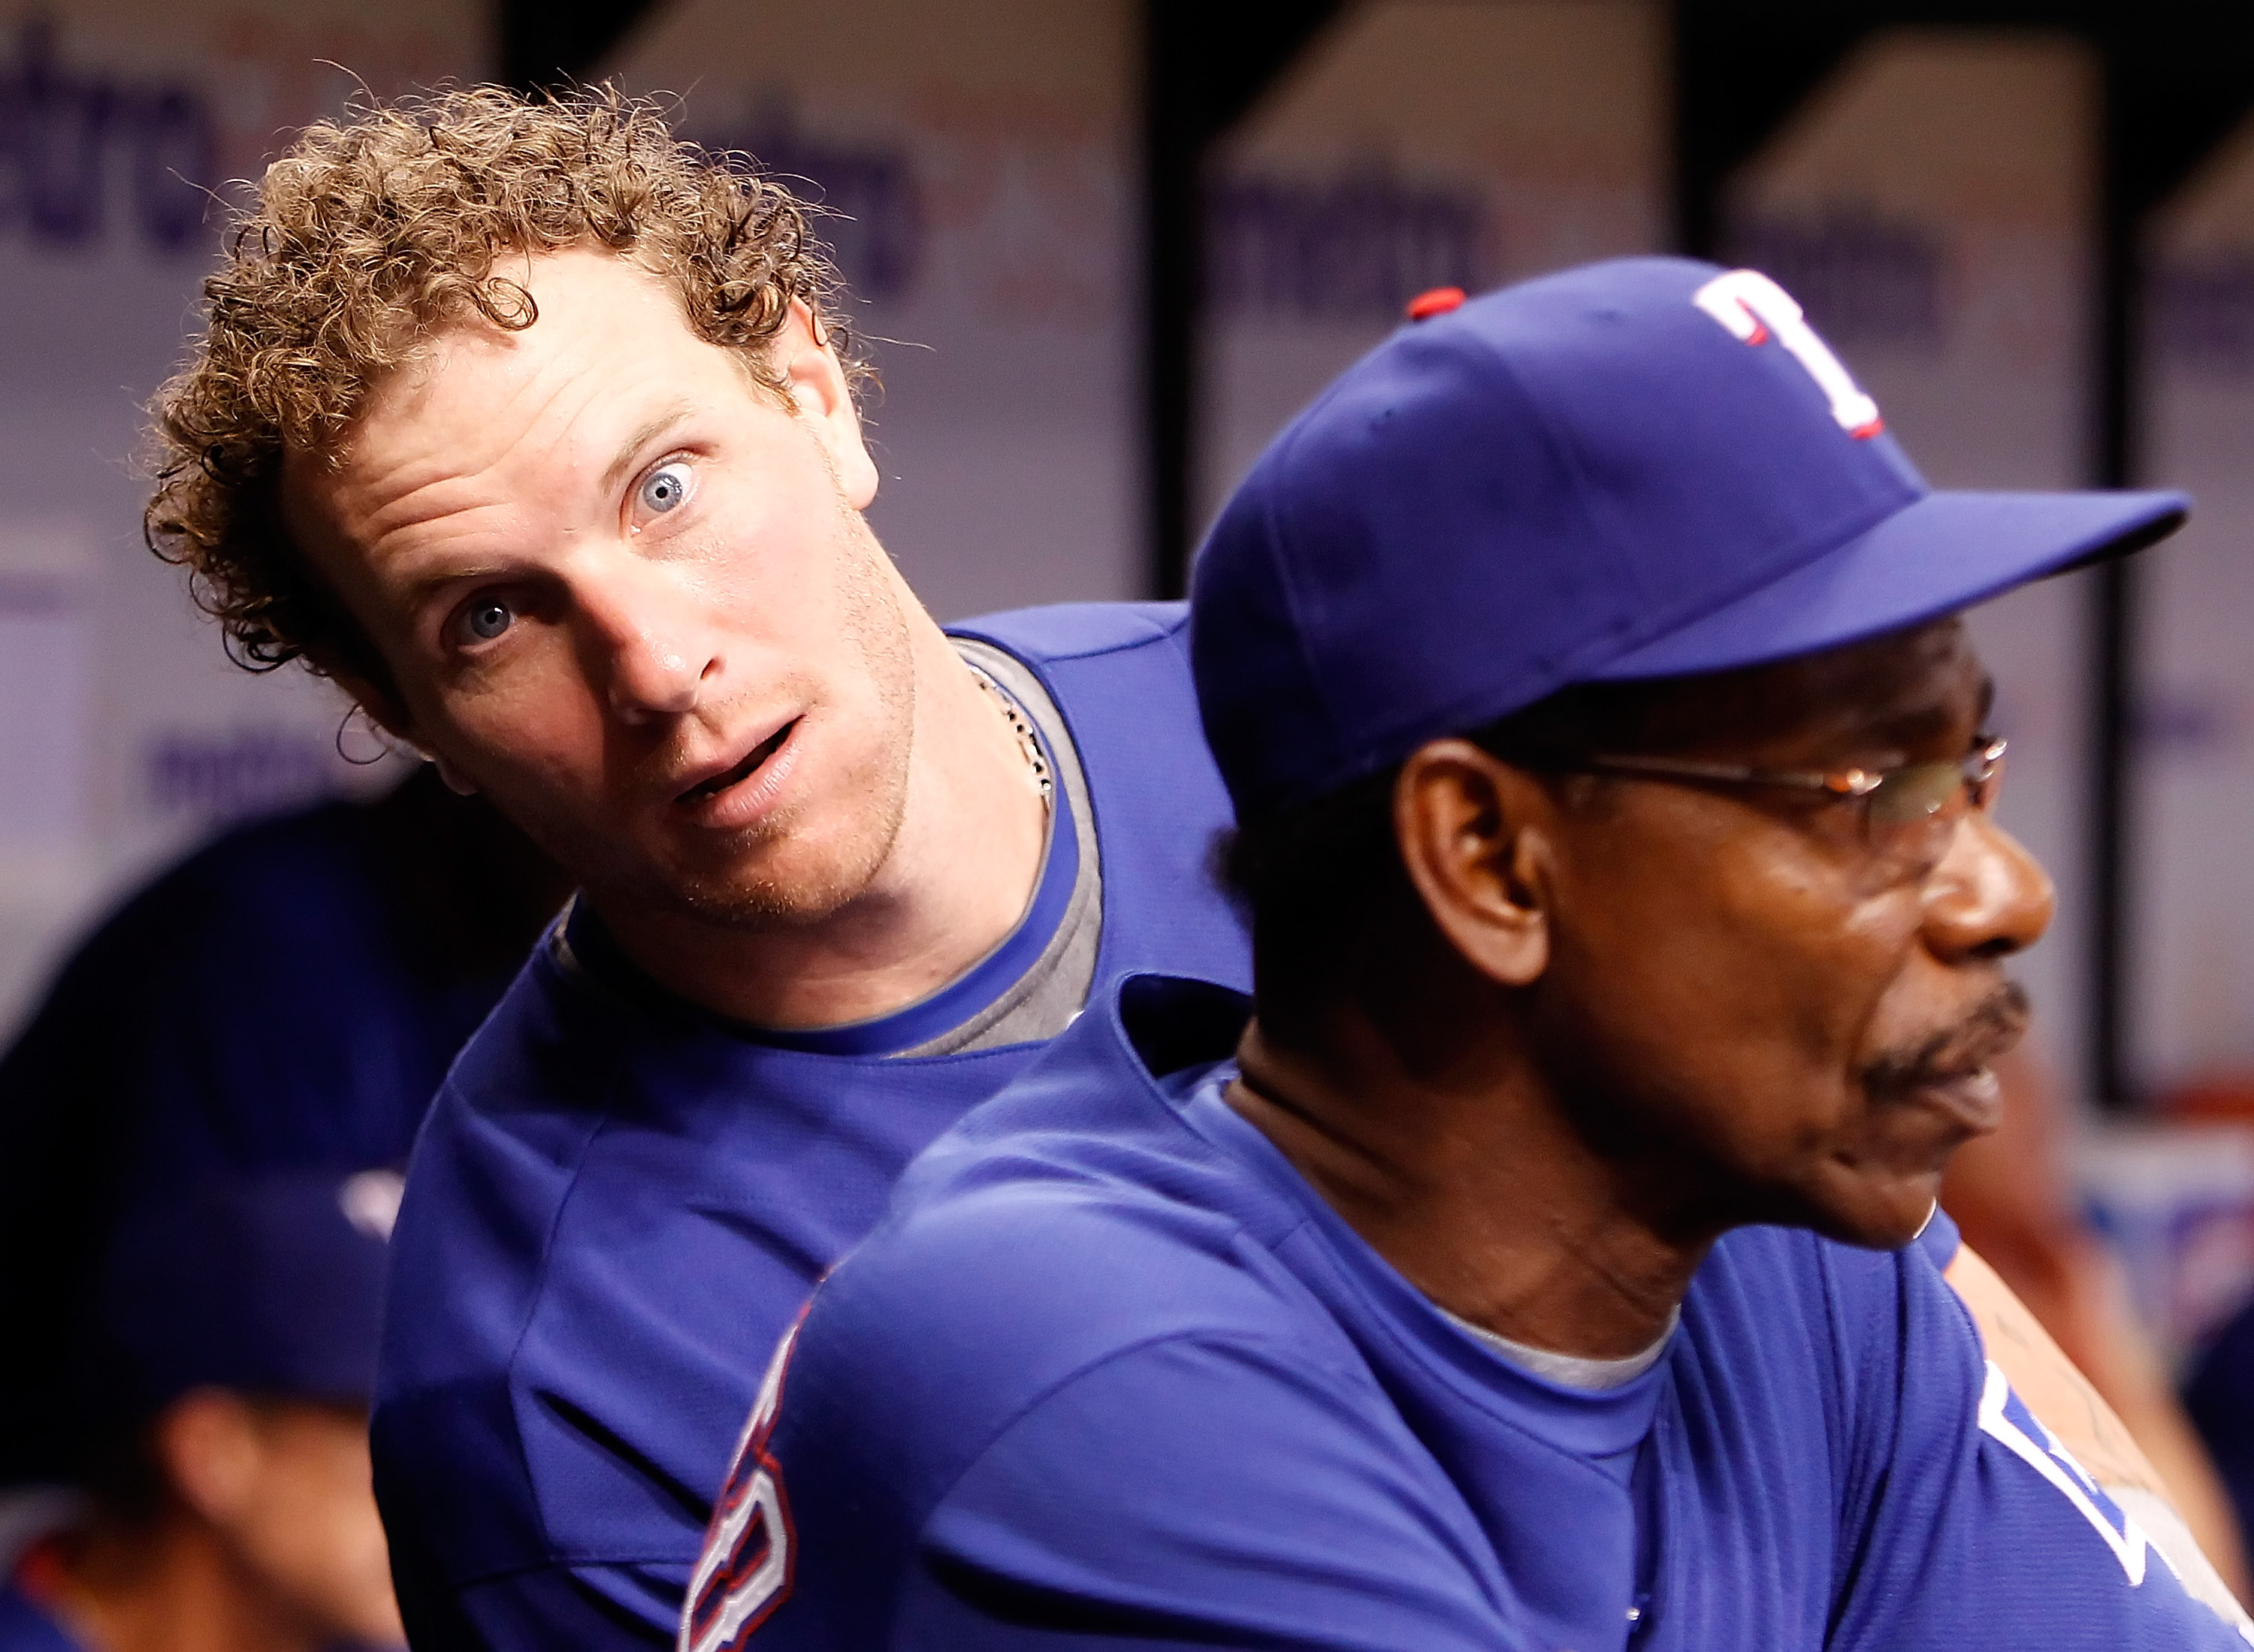 ST. PETERSBURG - AUGUST 17:  Outfielder Josh Hamilton #32 of the Texas Rangers clowns around behing manager Ron Washington #38 during the game against the Tampa Bay Rays at Tropicana Field on August 17, 2010 in St. Petersburg, Florida.  (Photo by J. Meric